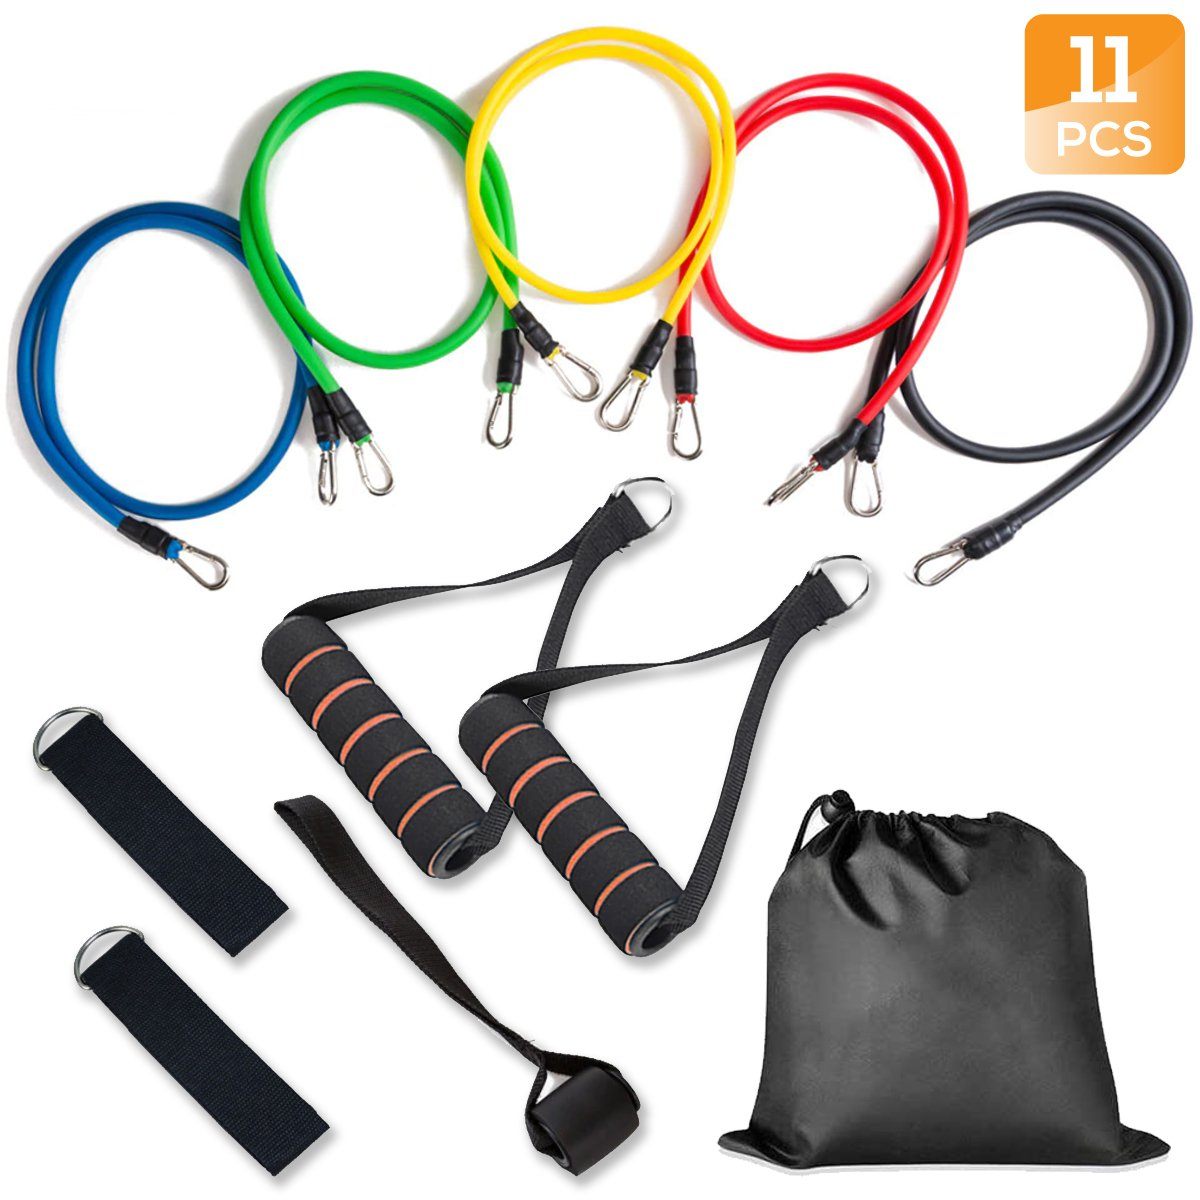 WODFitters Resistance Band Set - Stackable 5 Workout Band Set With Grip Handles 